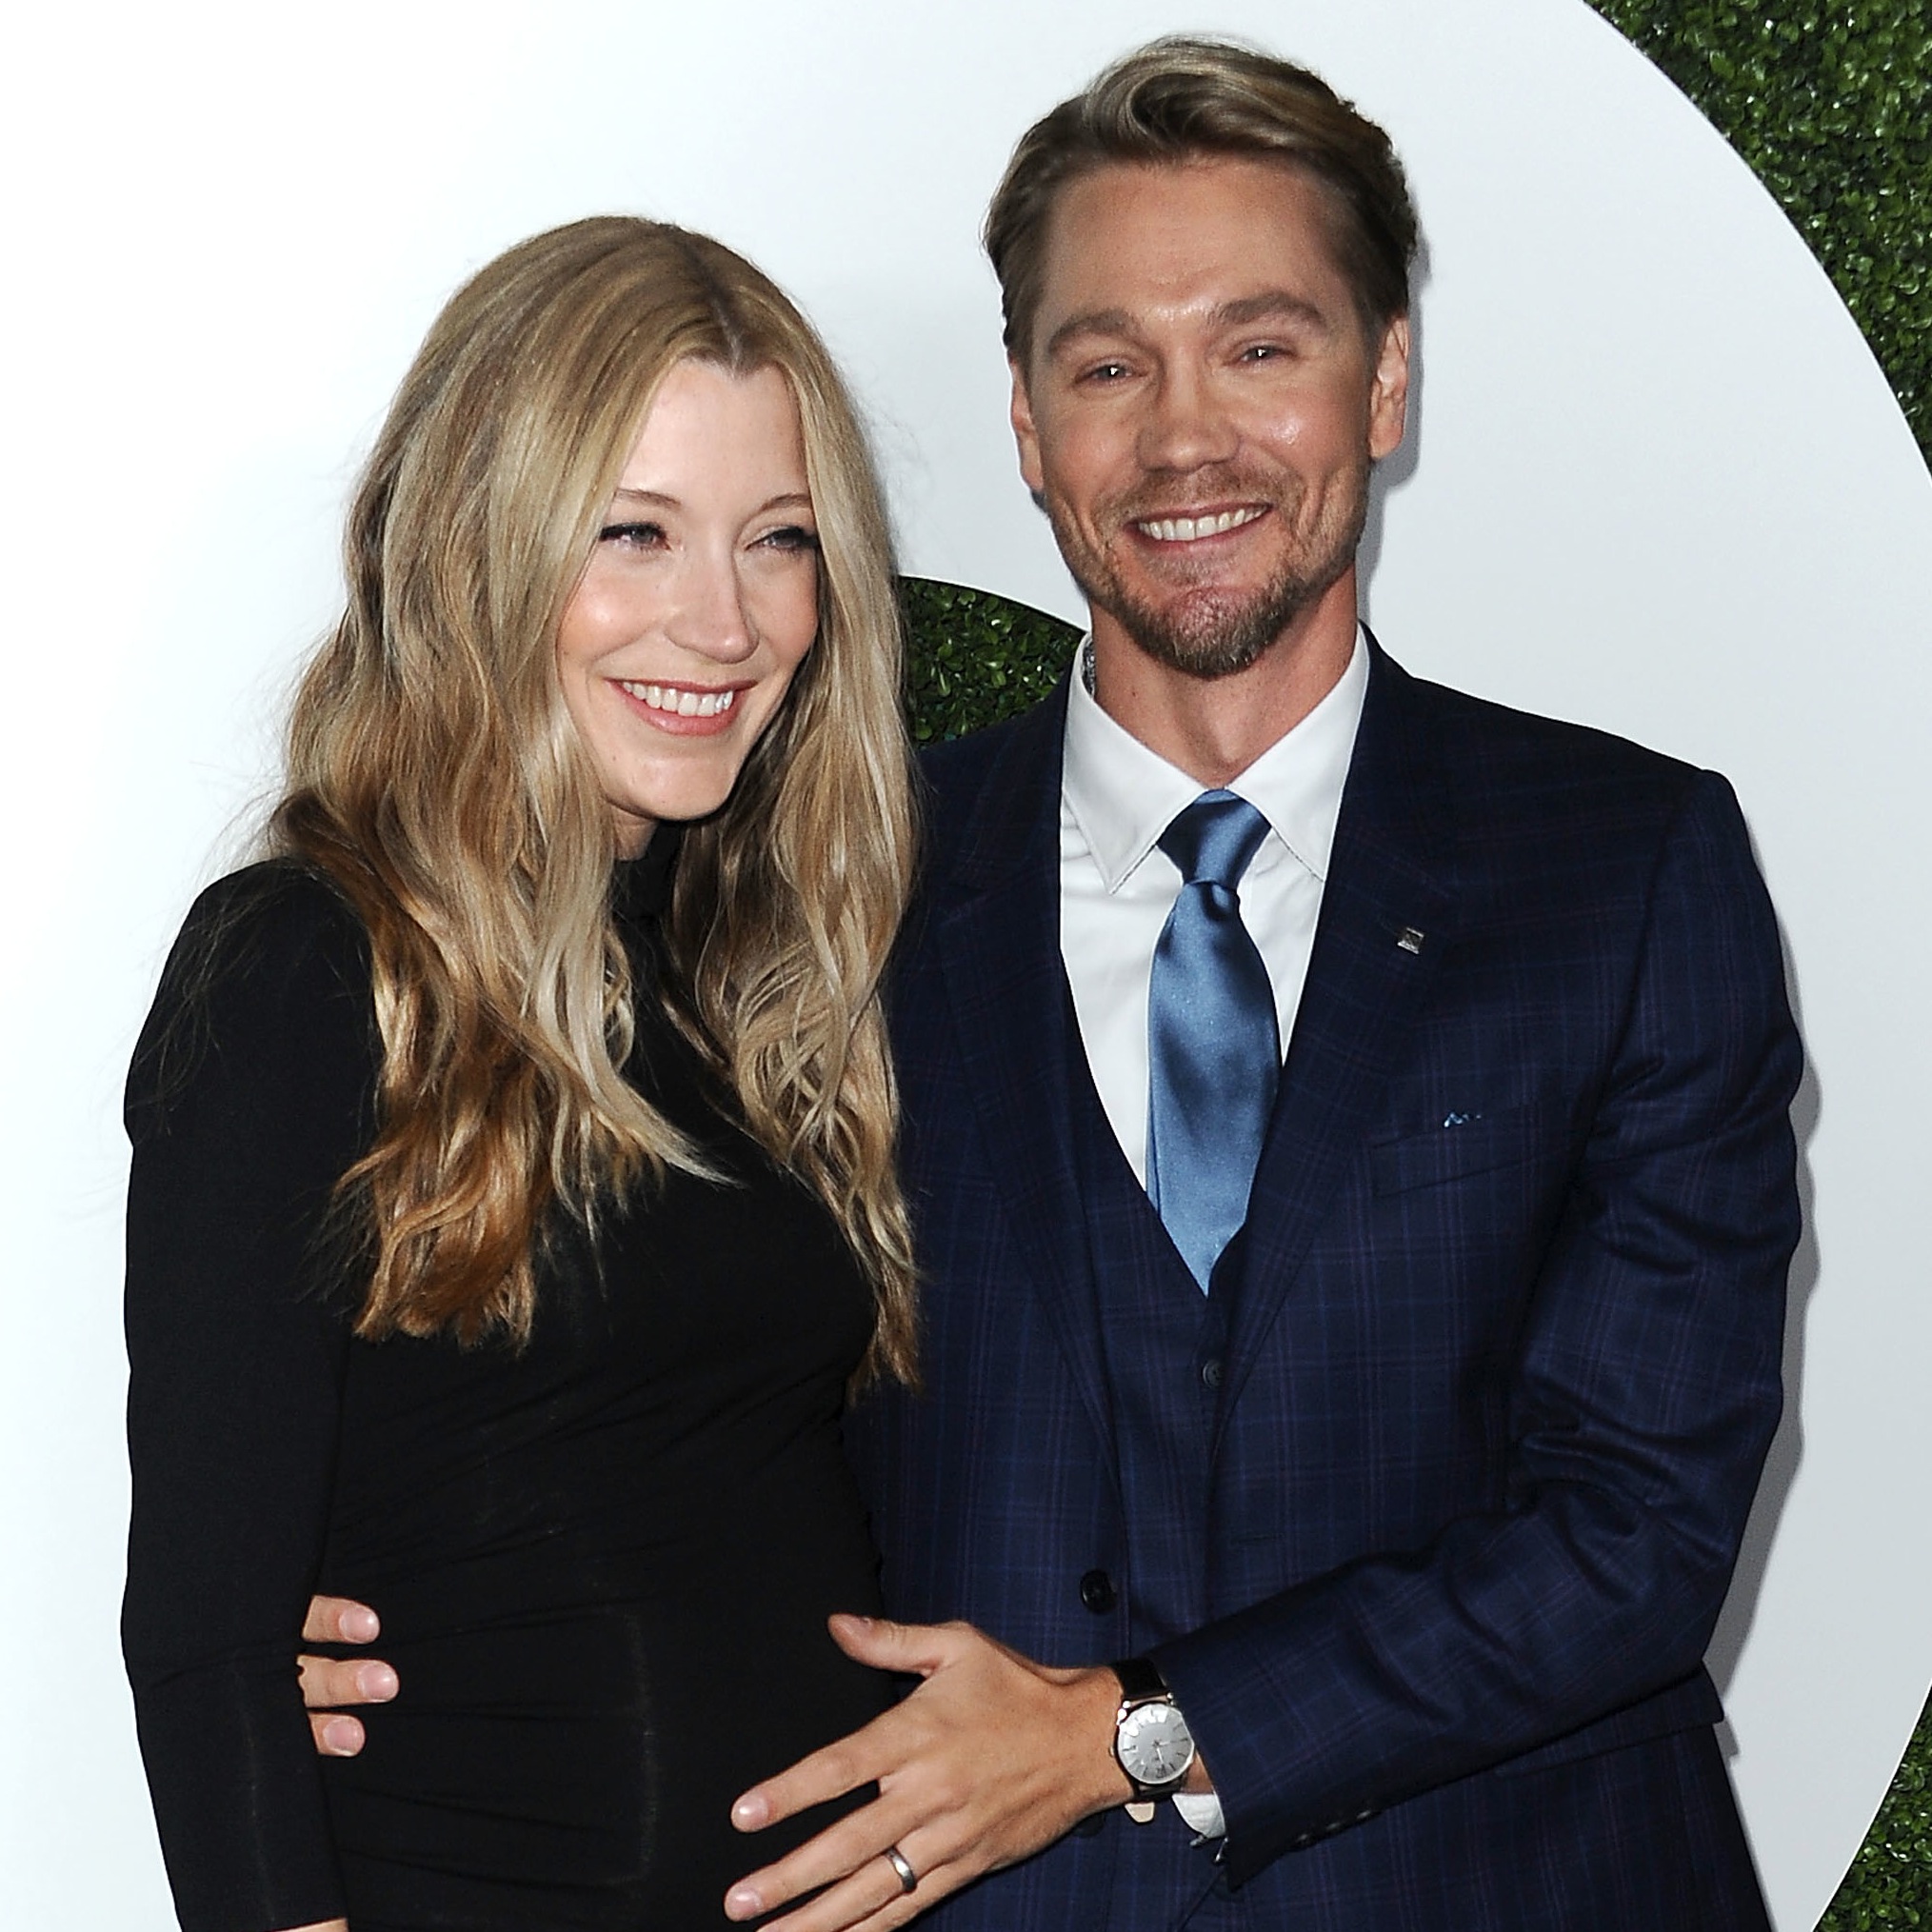 Who Is Chad Michael Murray's Wife? All About Sarah Roemer